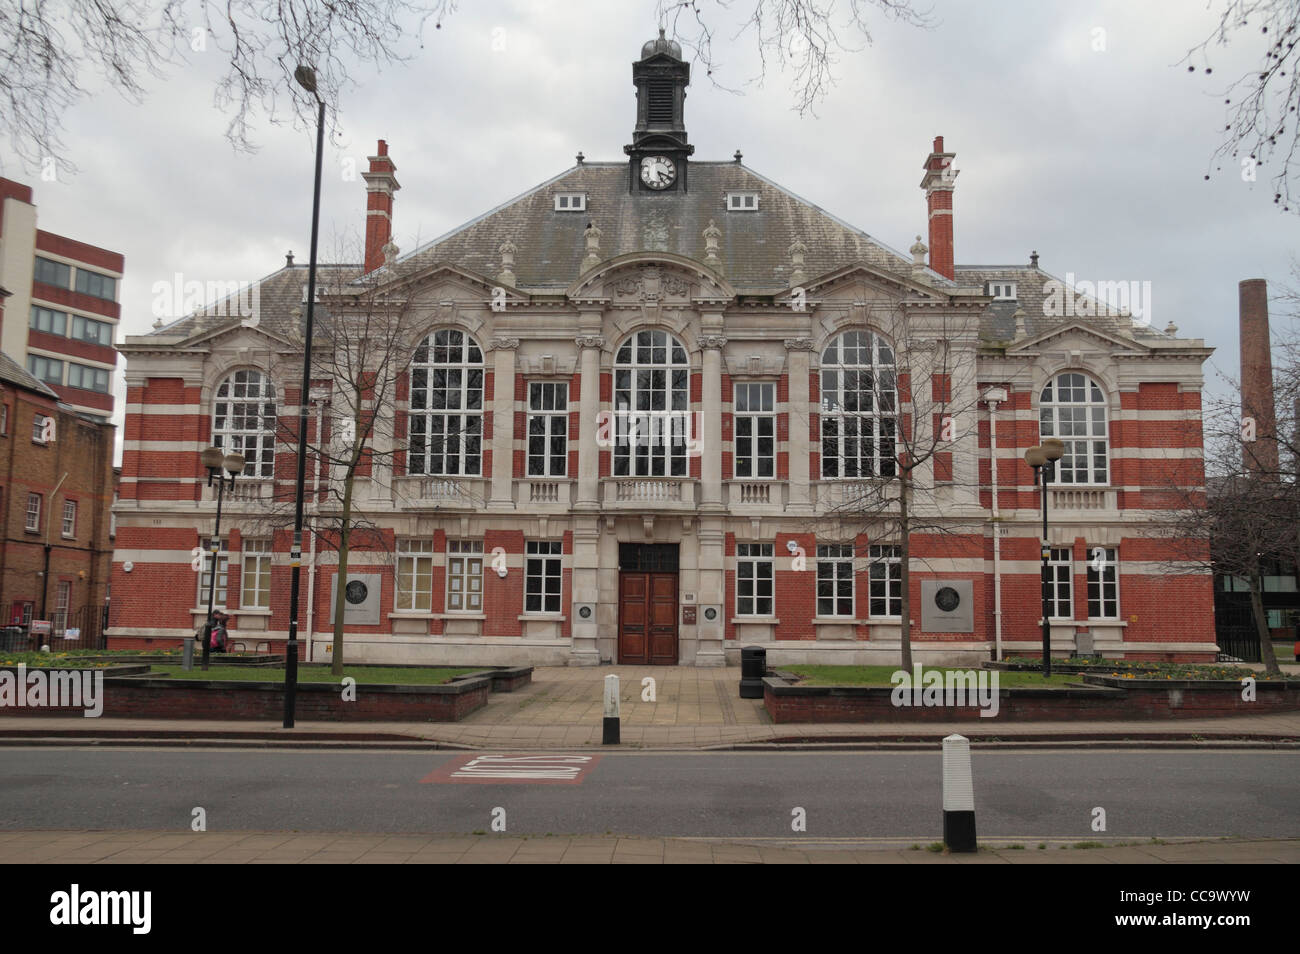 The front entrance to Tottenham Town Hall, North London, United Kingdom, Stock Photo